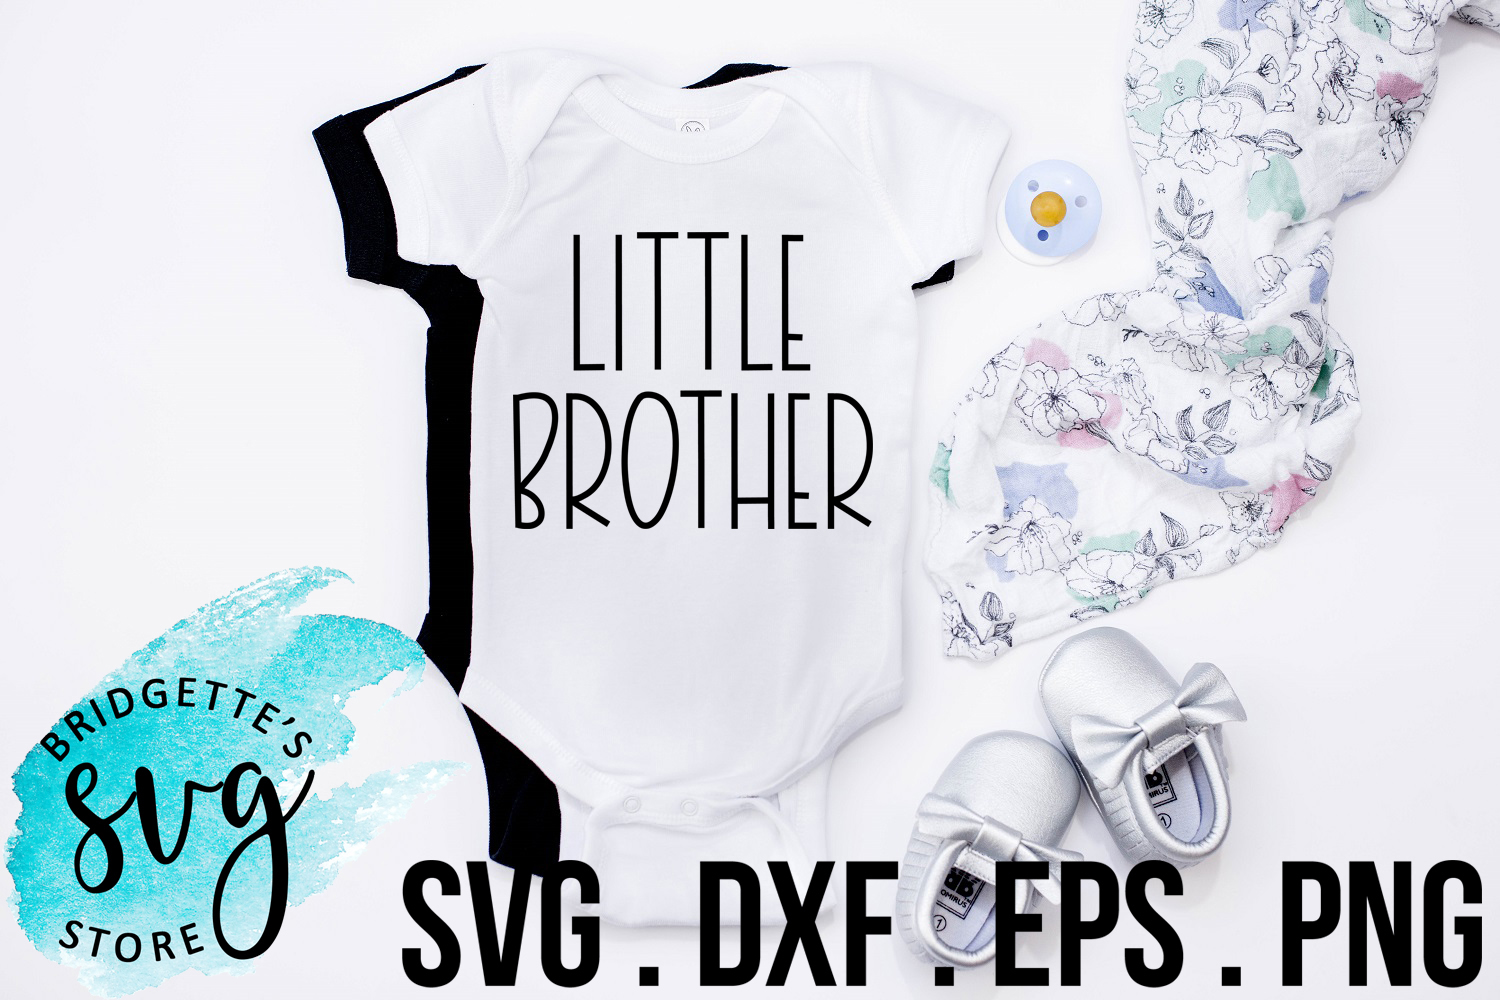 Little Brother SVG, DXF, PNG, EPS File Cricut Silhouette